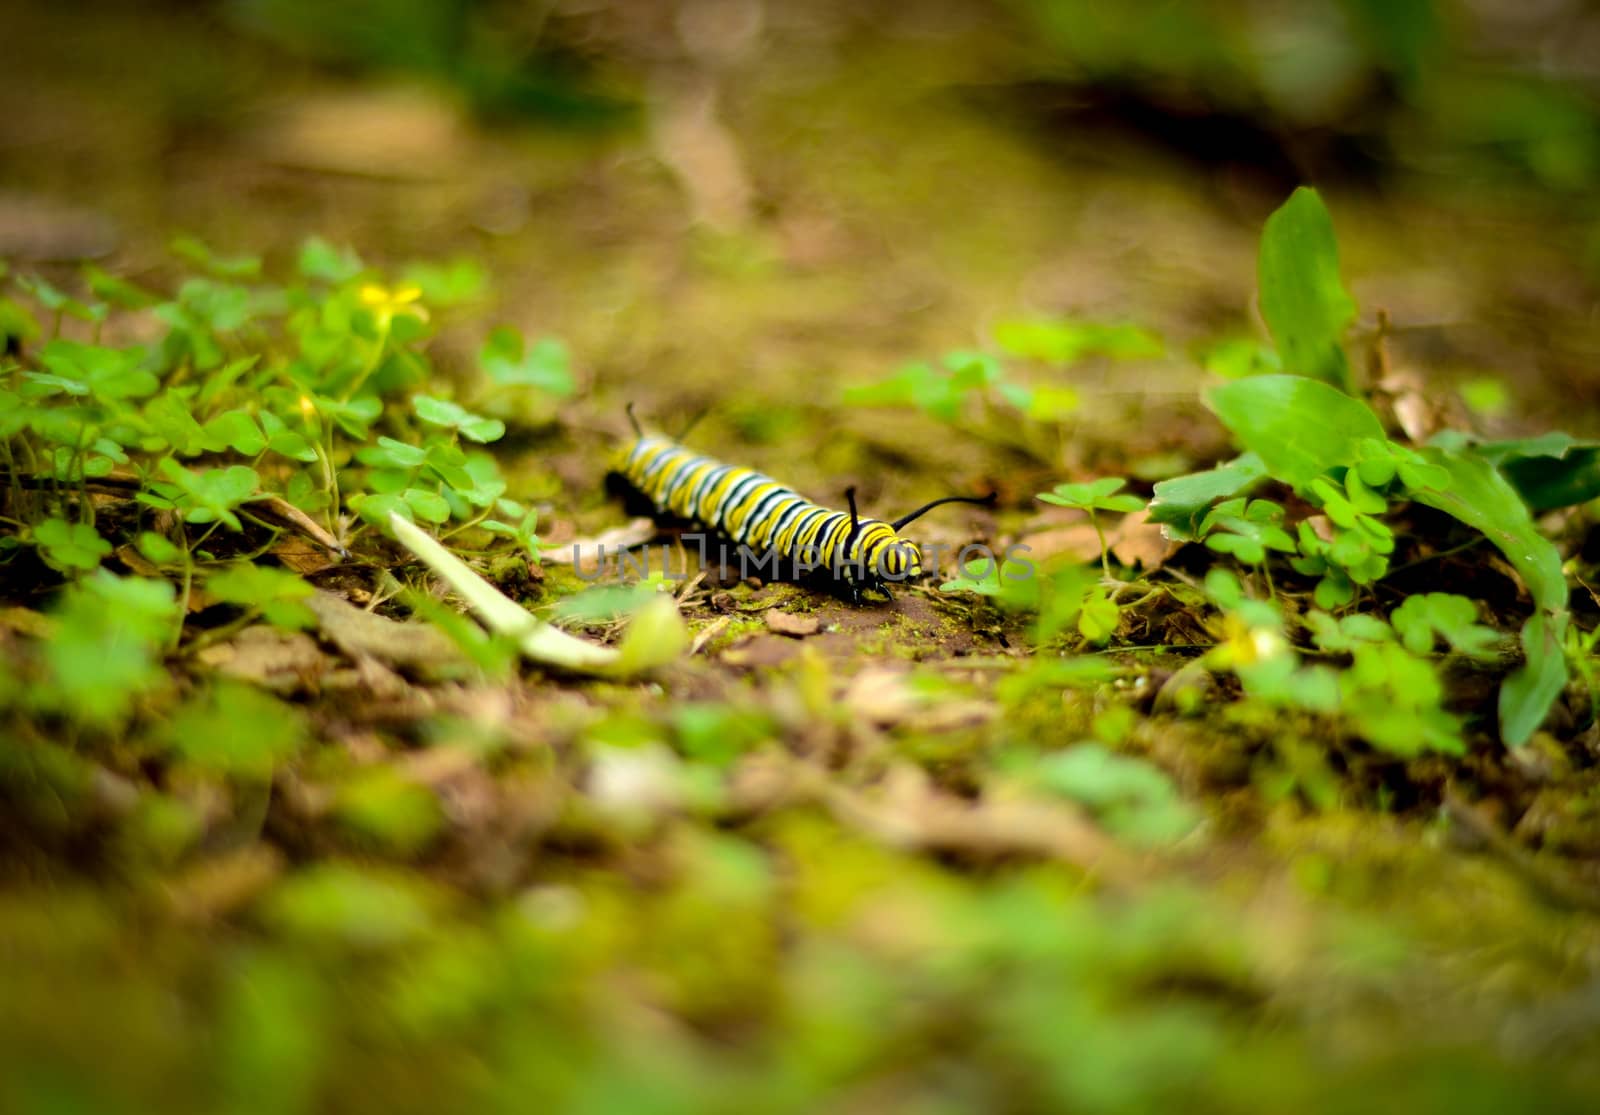 A Bright Yellow And Black Caterpiller On Jungle Floor (Shallow DoF)